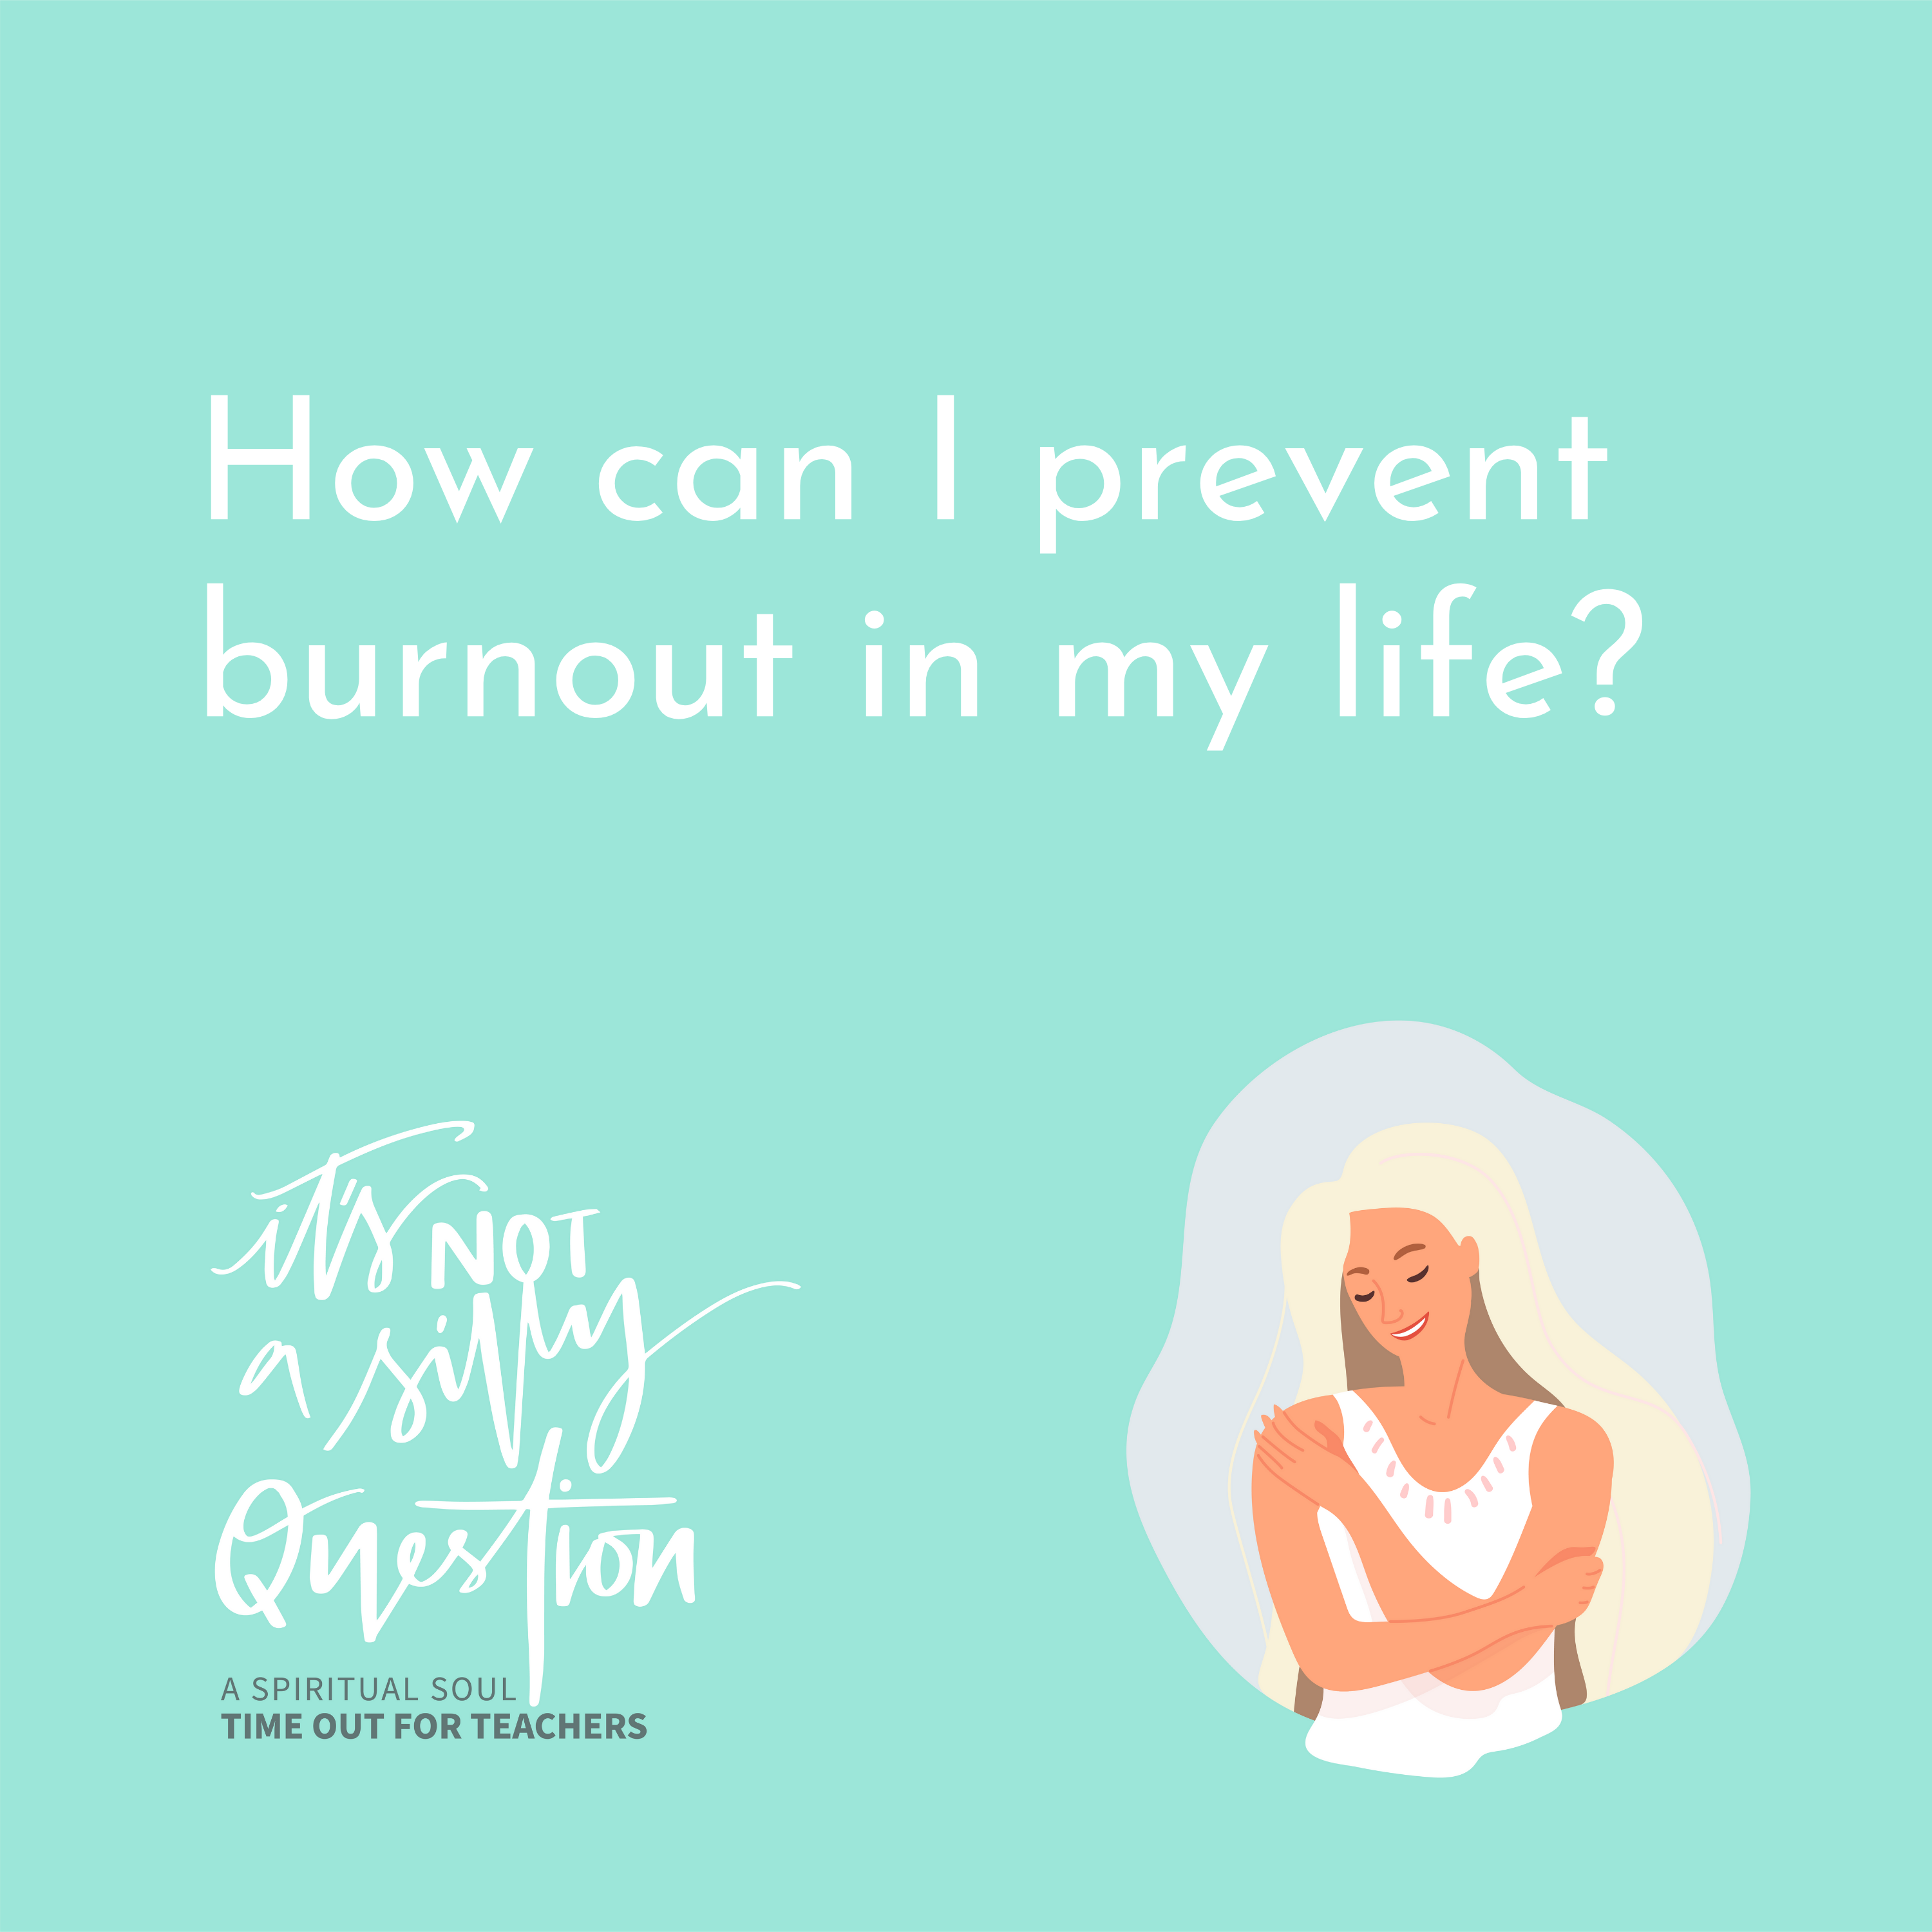 How can I prevent burnout?